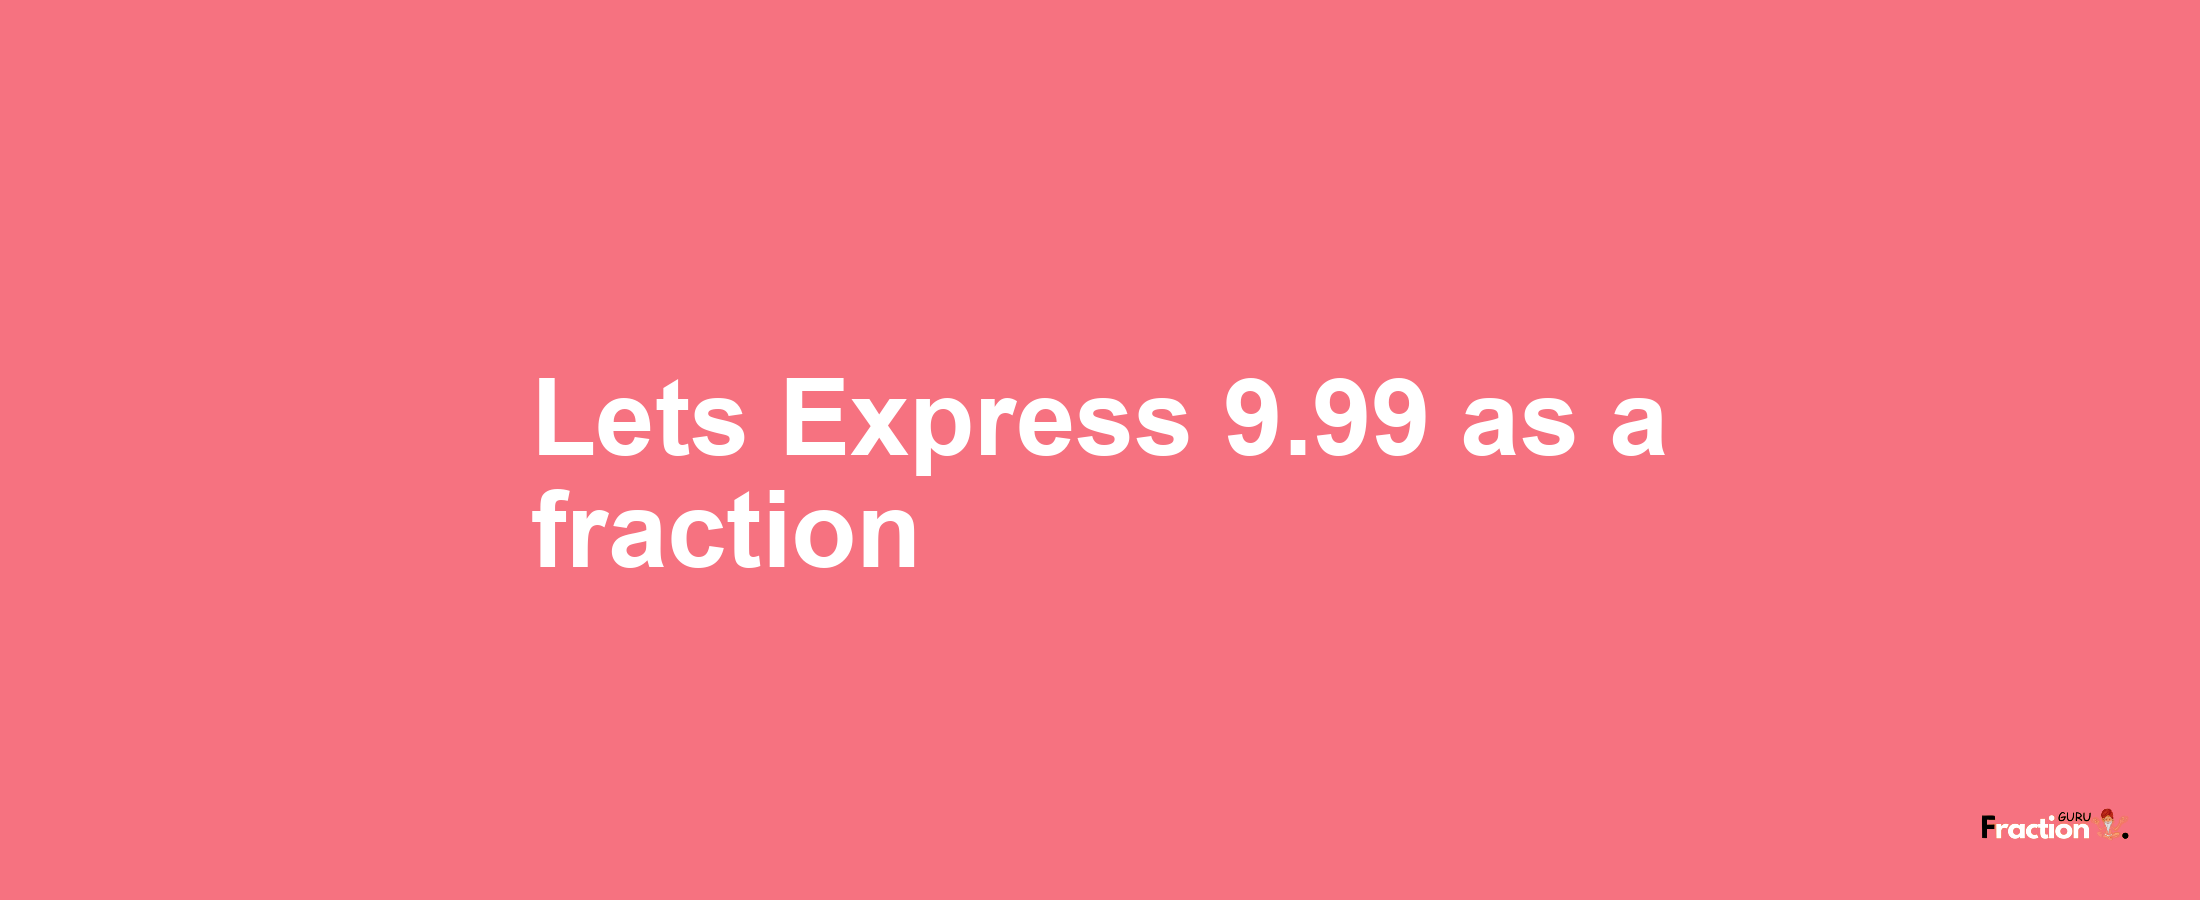 Lets Express 9.99 as afraction